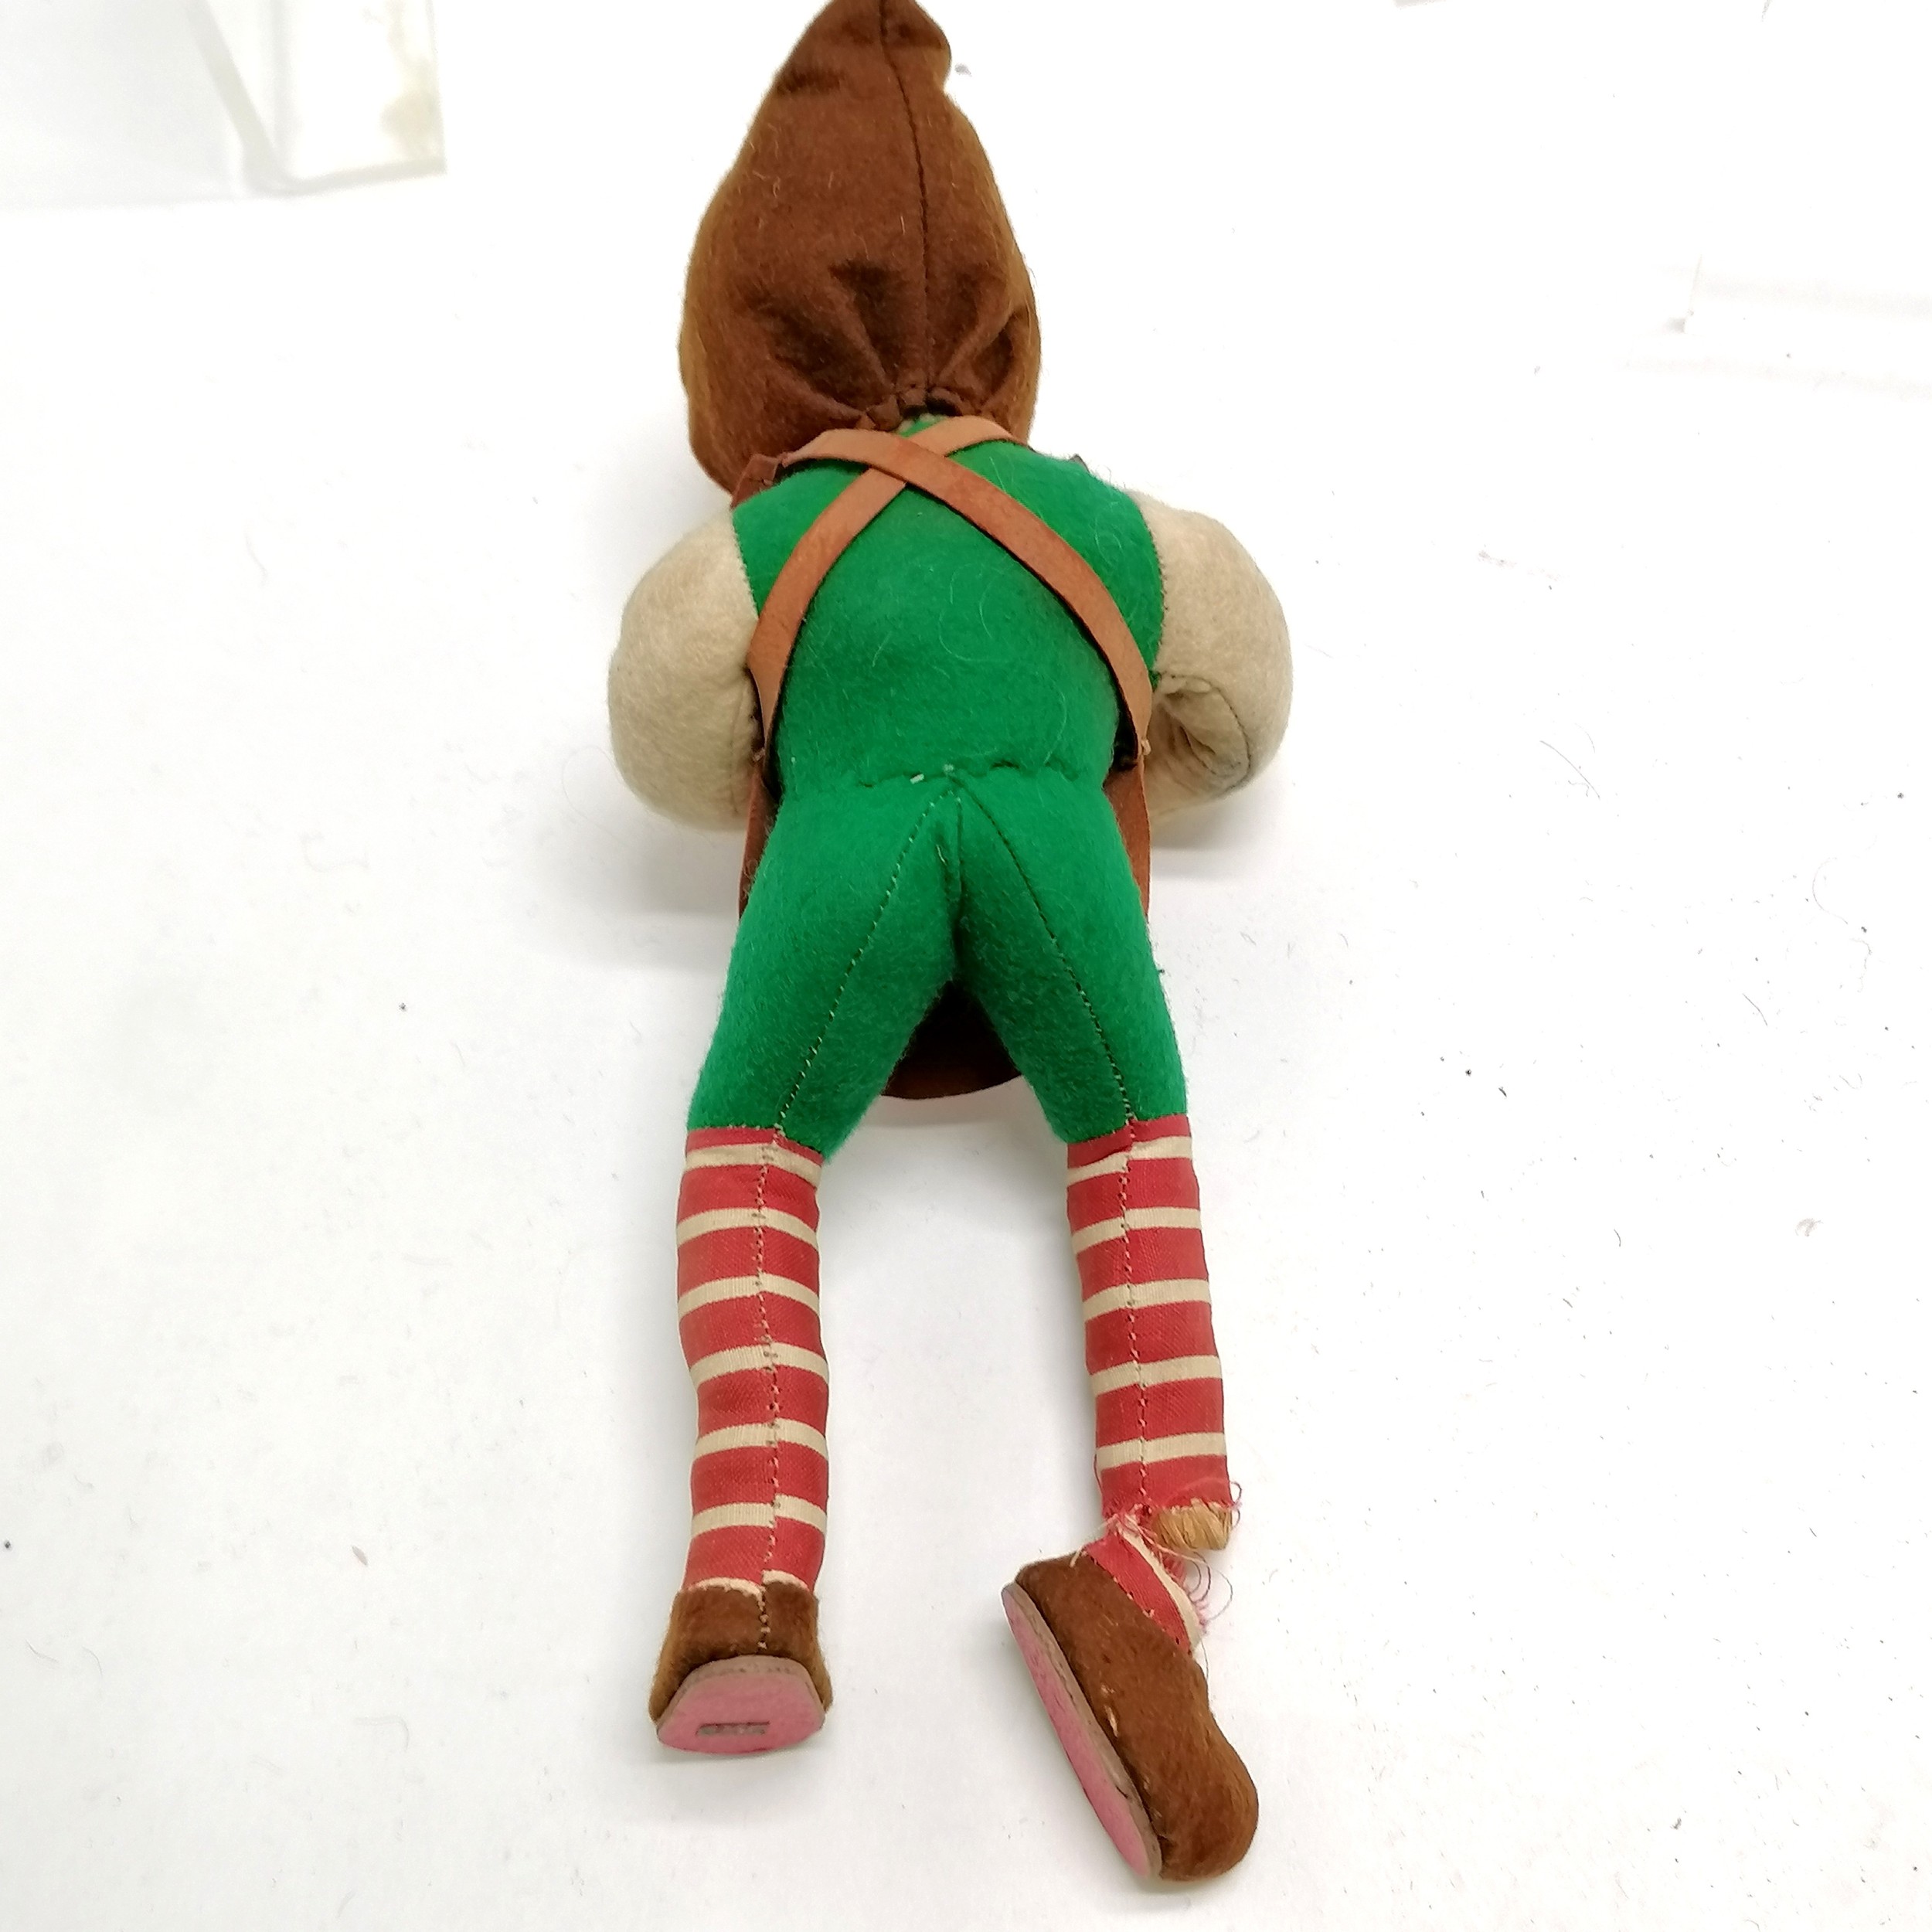 Vintage Kersa German felt and straw knome figure with a leather apron23cm high - 1 foot has come - Image 3 of 5